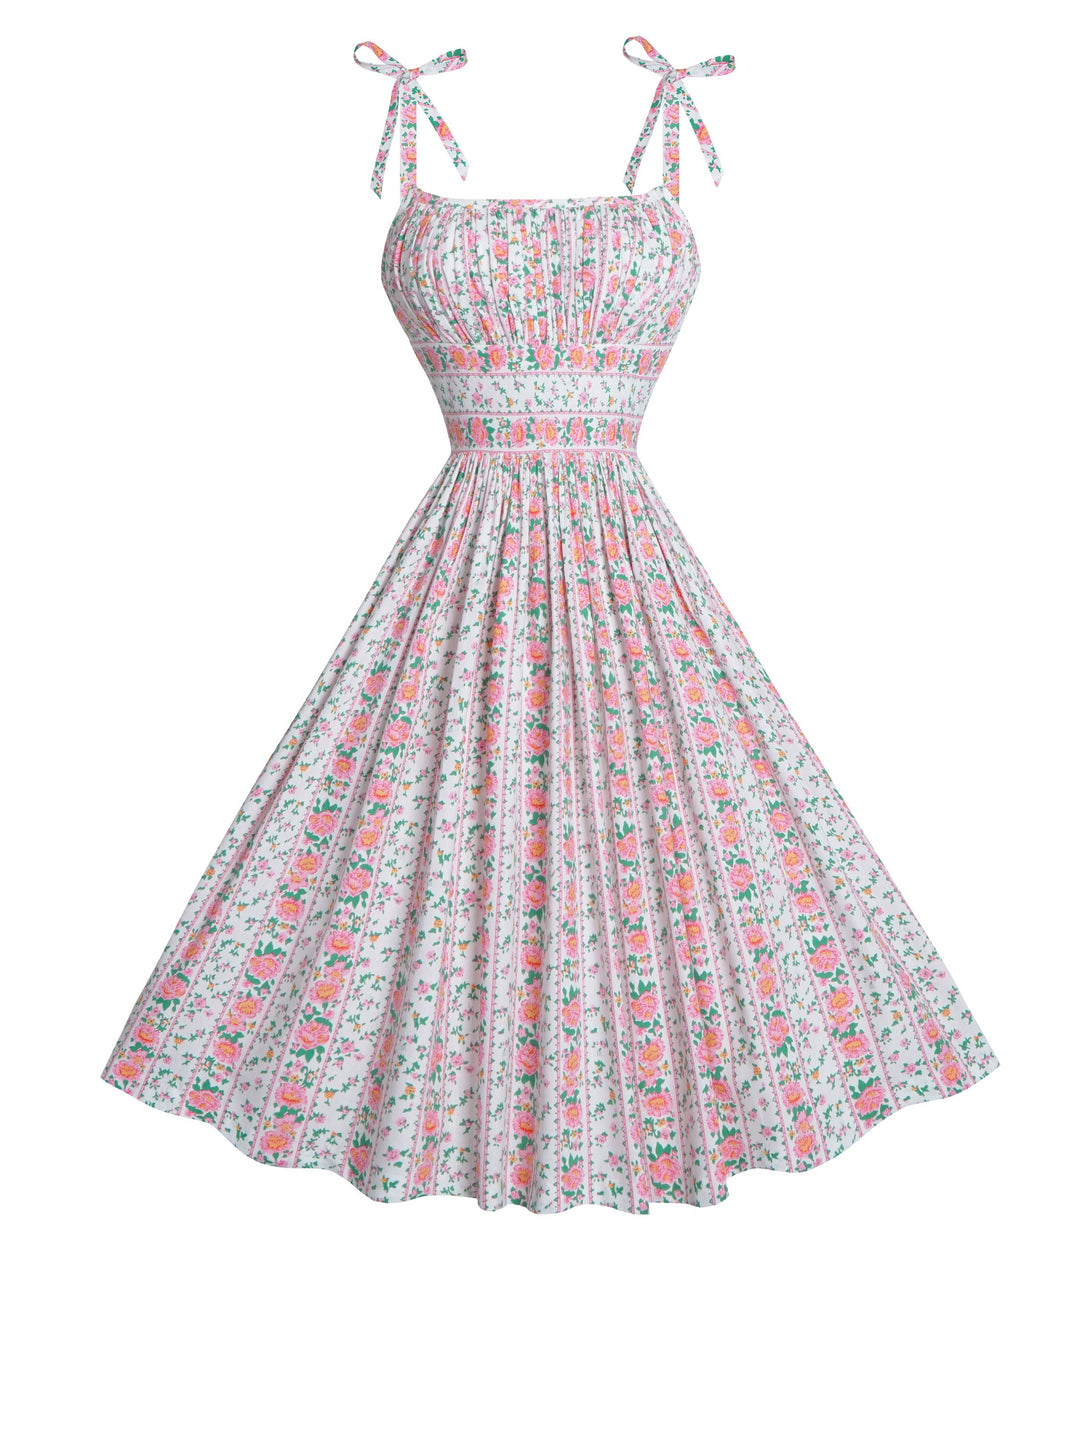 MTO - Kelly Dress Pink "Country Cottage Floral"